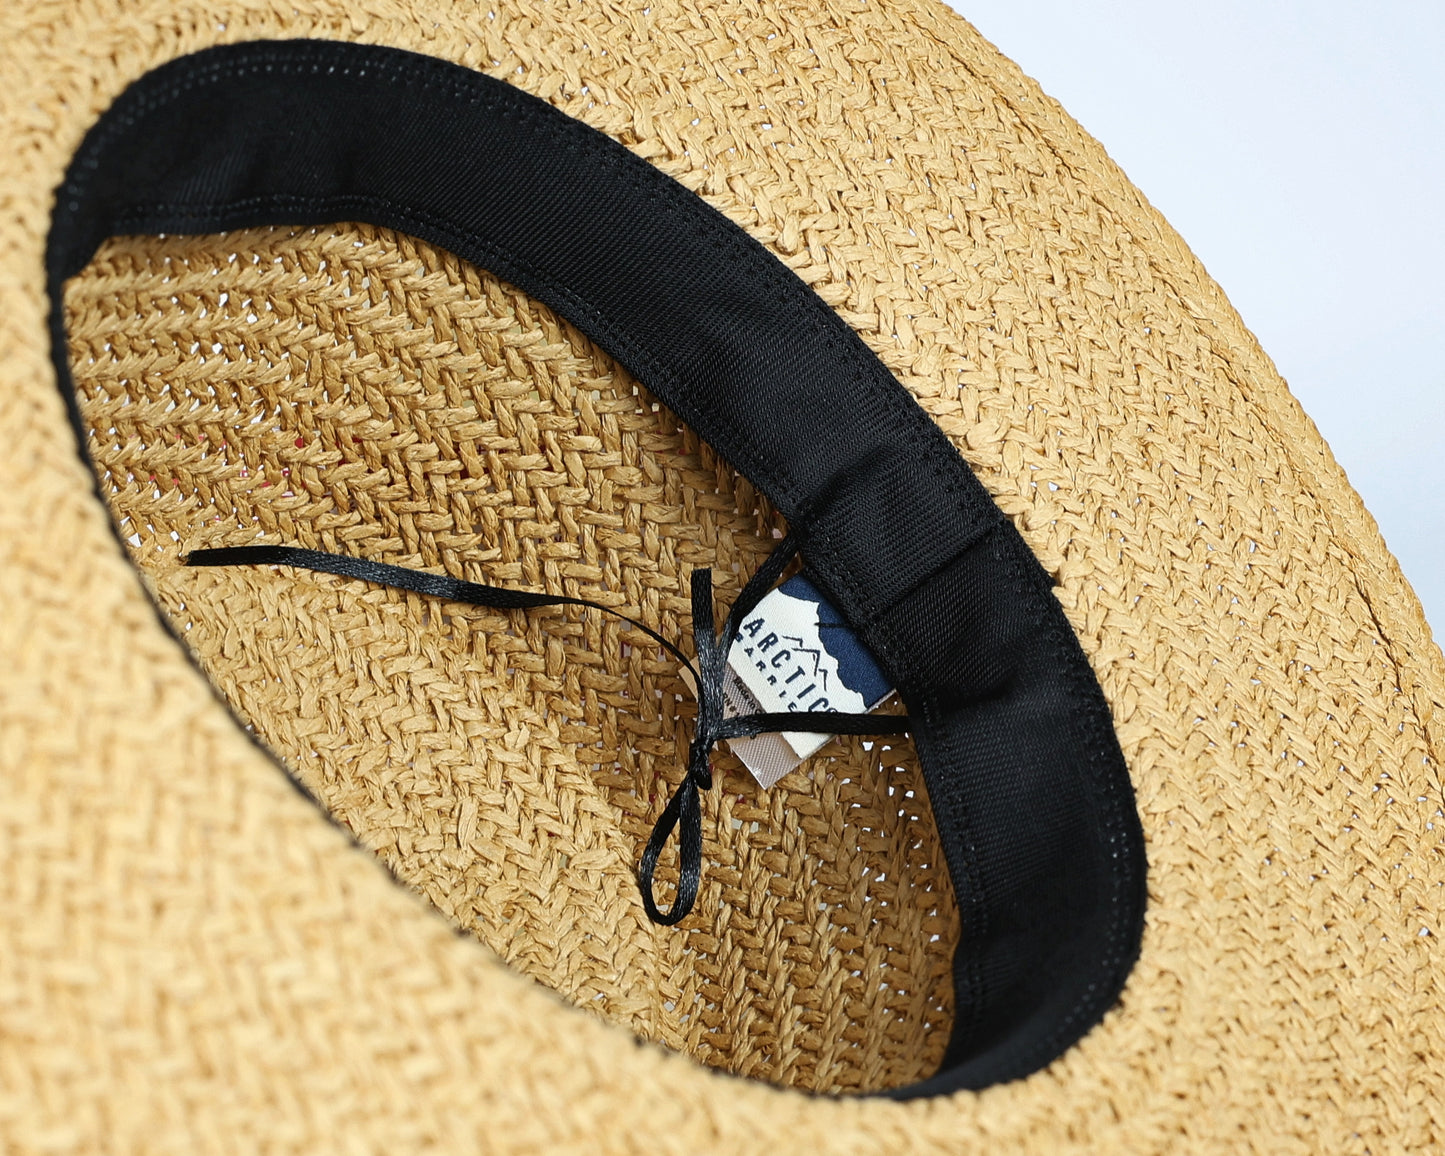 STRAW BOATER with BAND